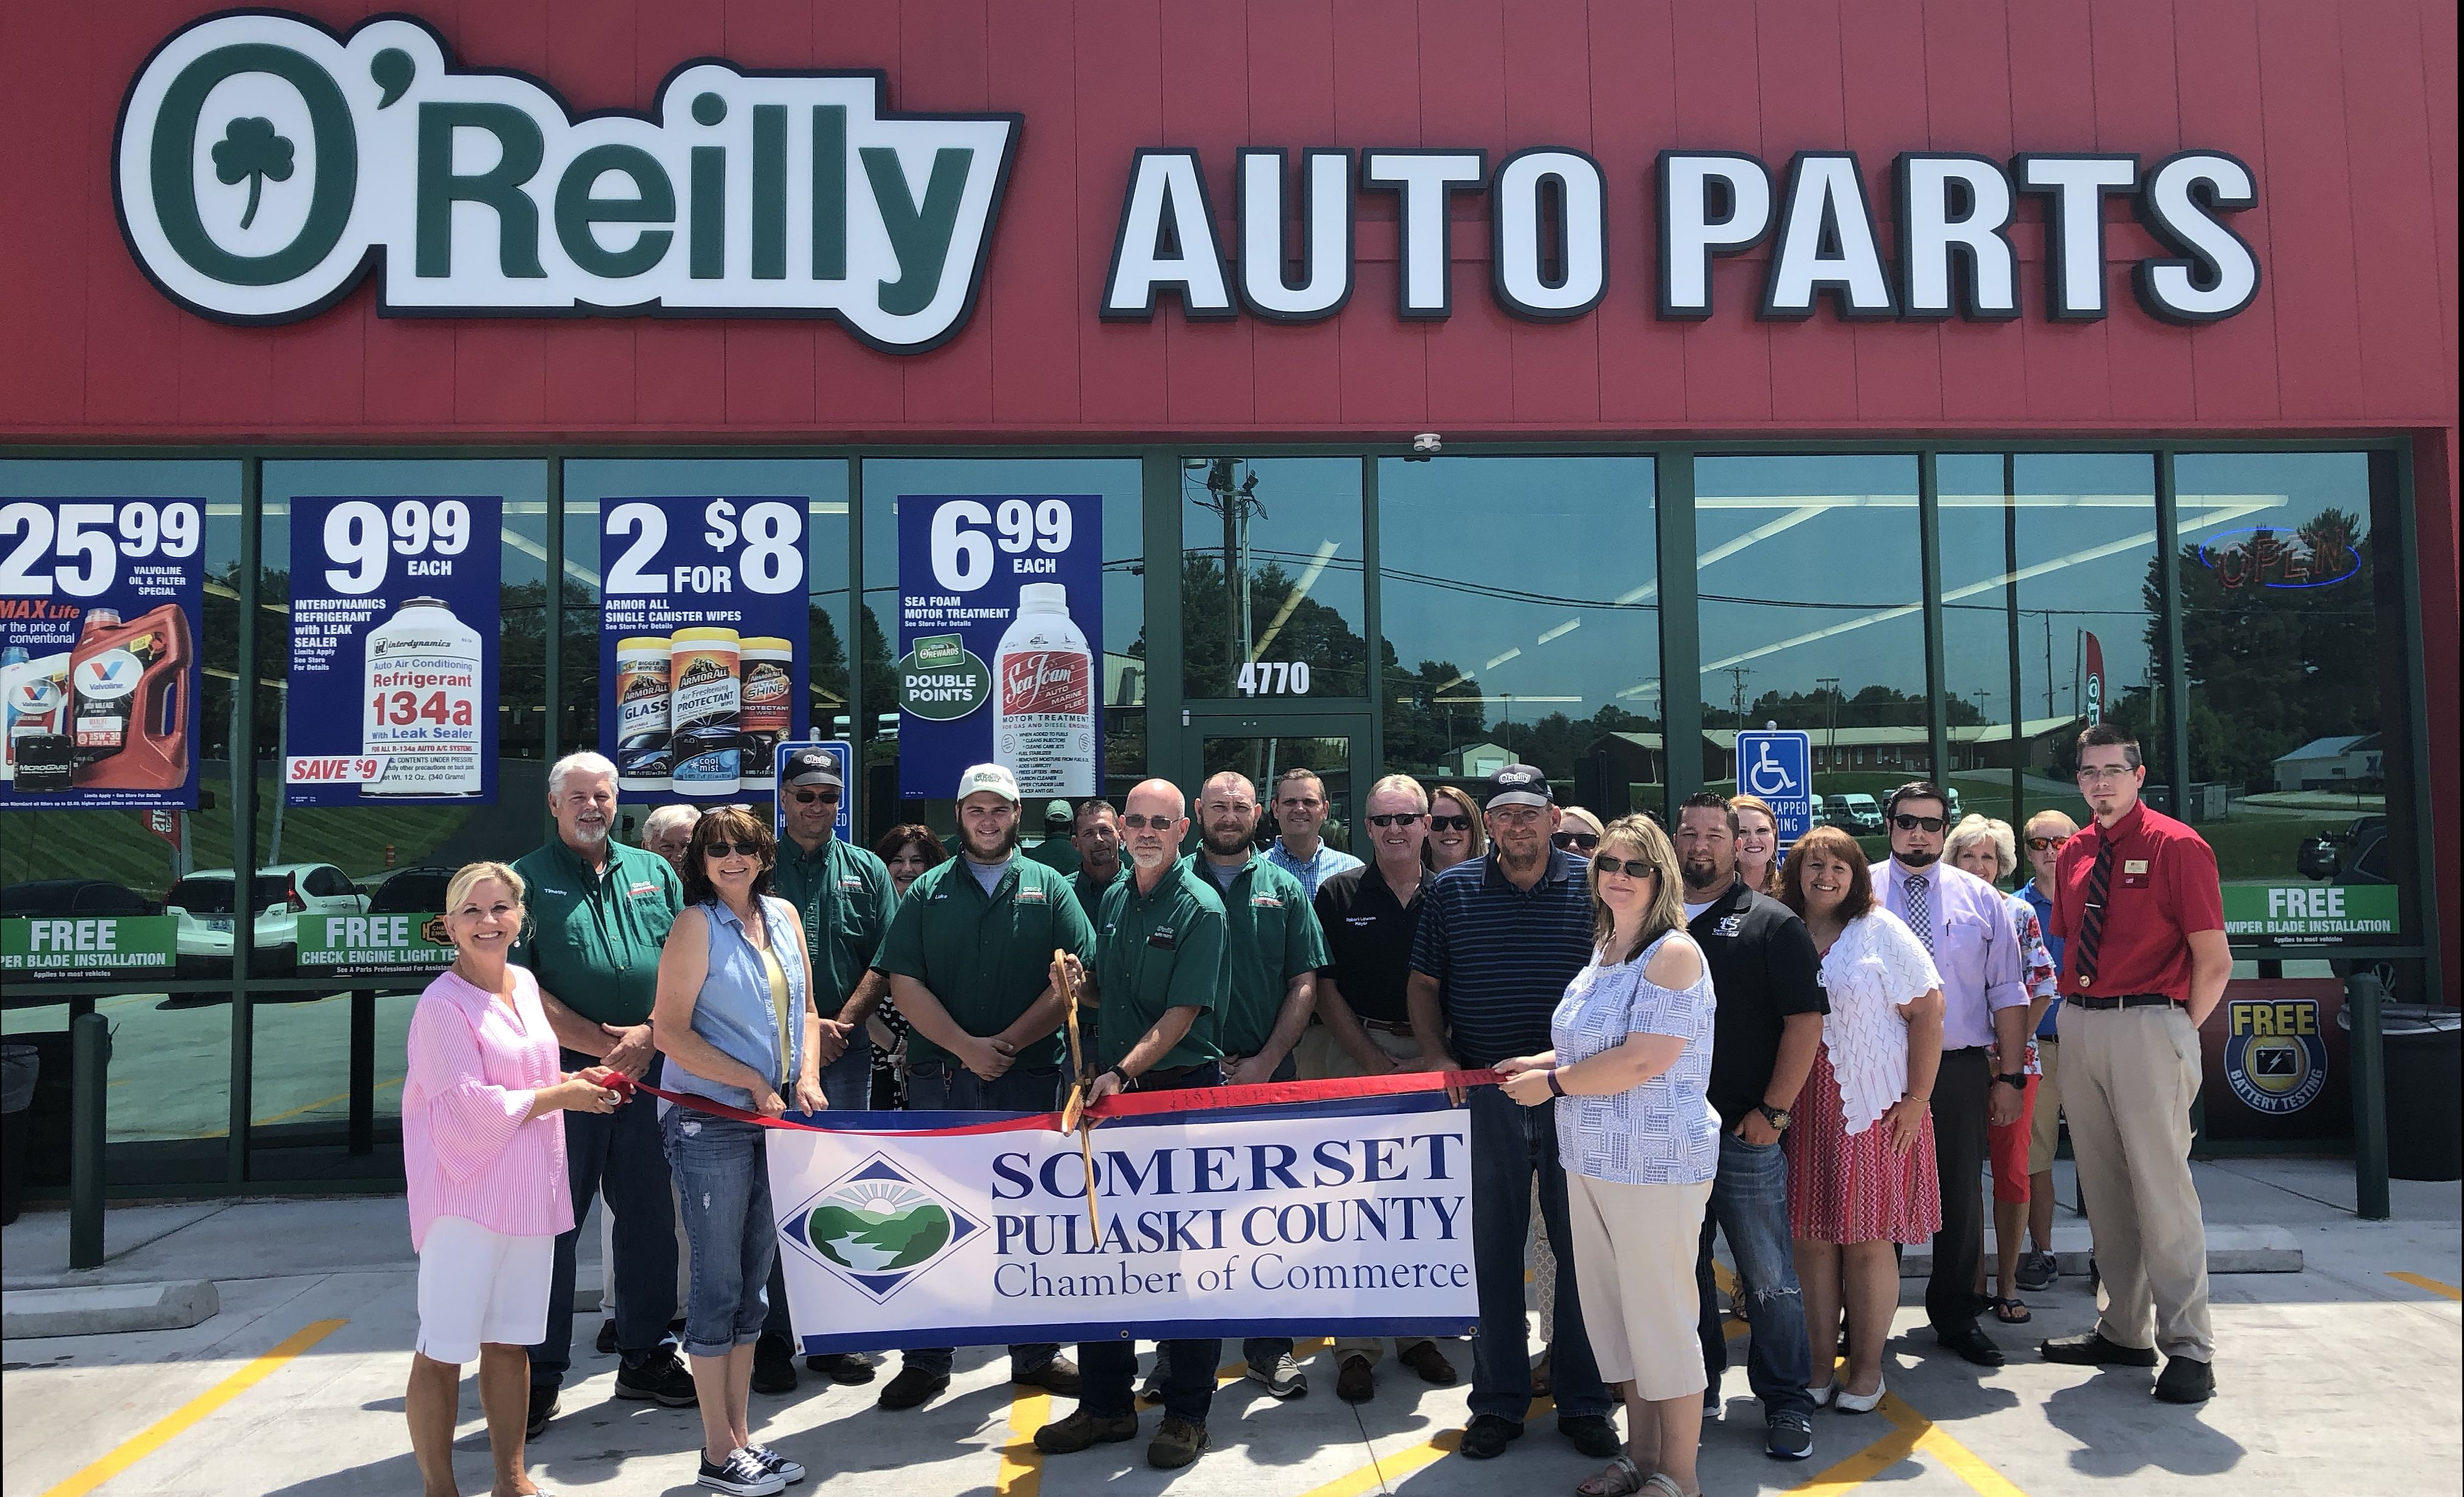 O Reilly Auto Parts 4770 South Highway 27 Somersetpulaskichamber